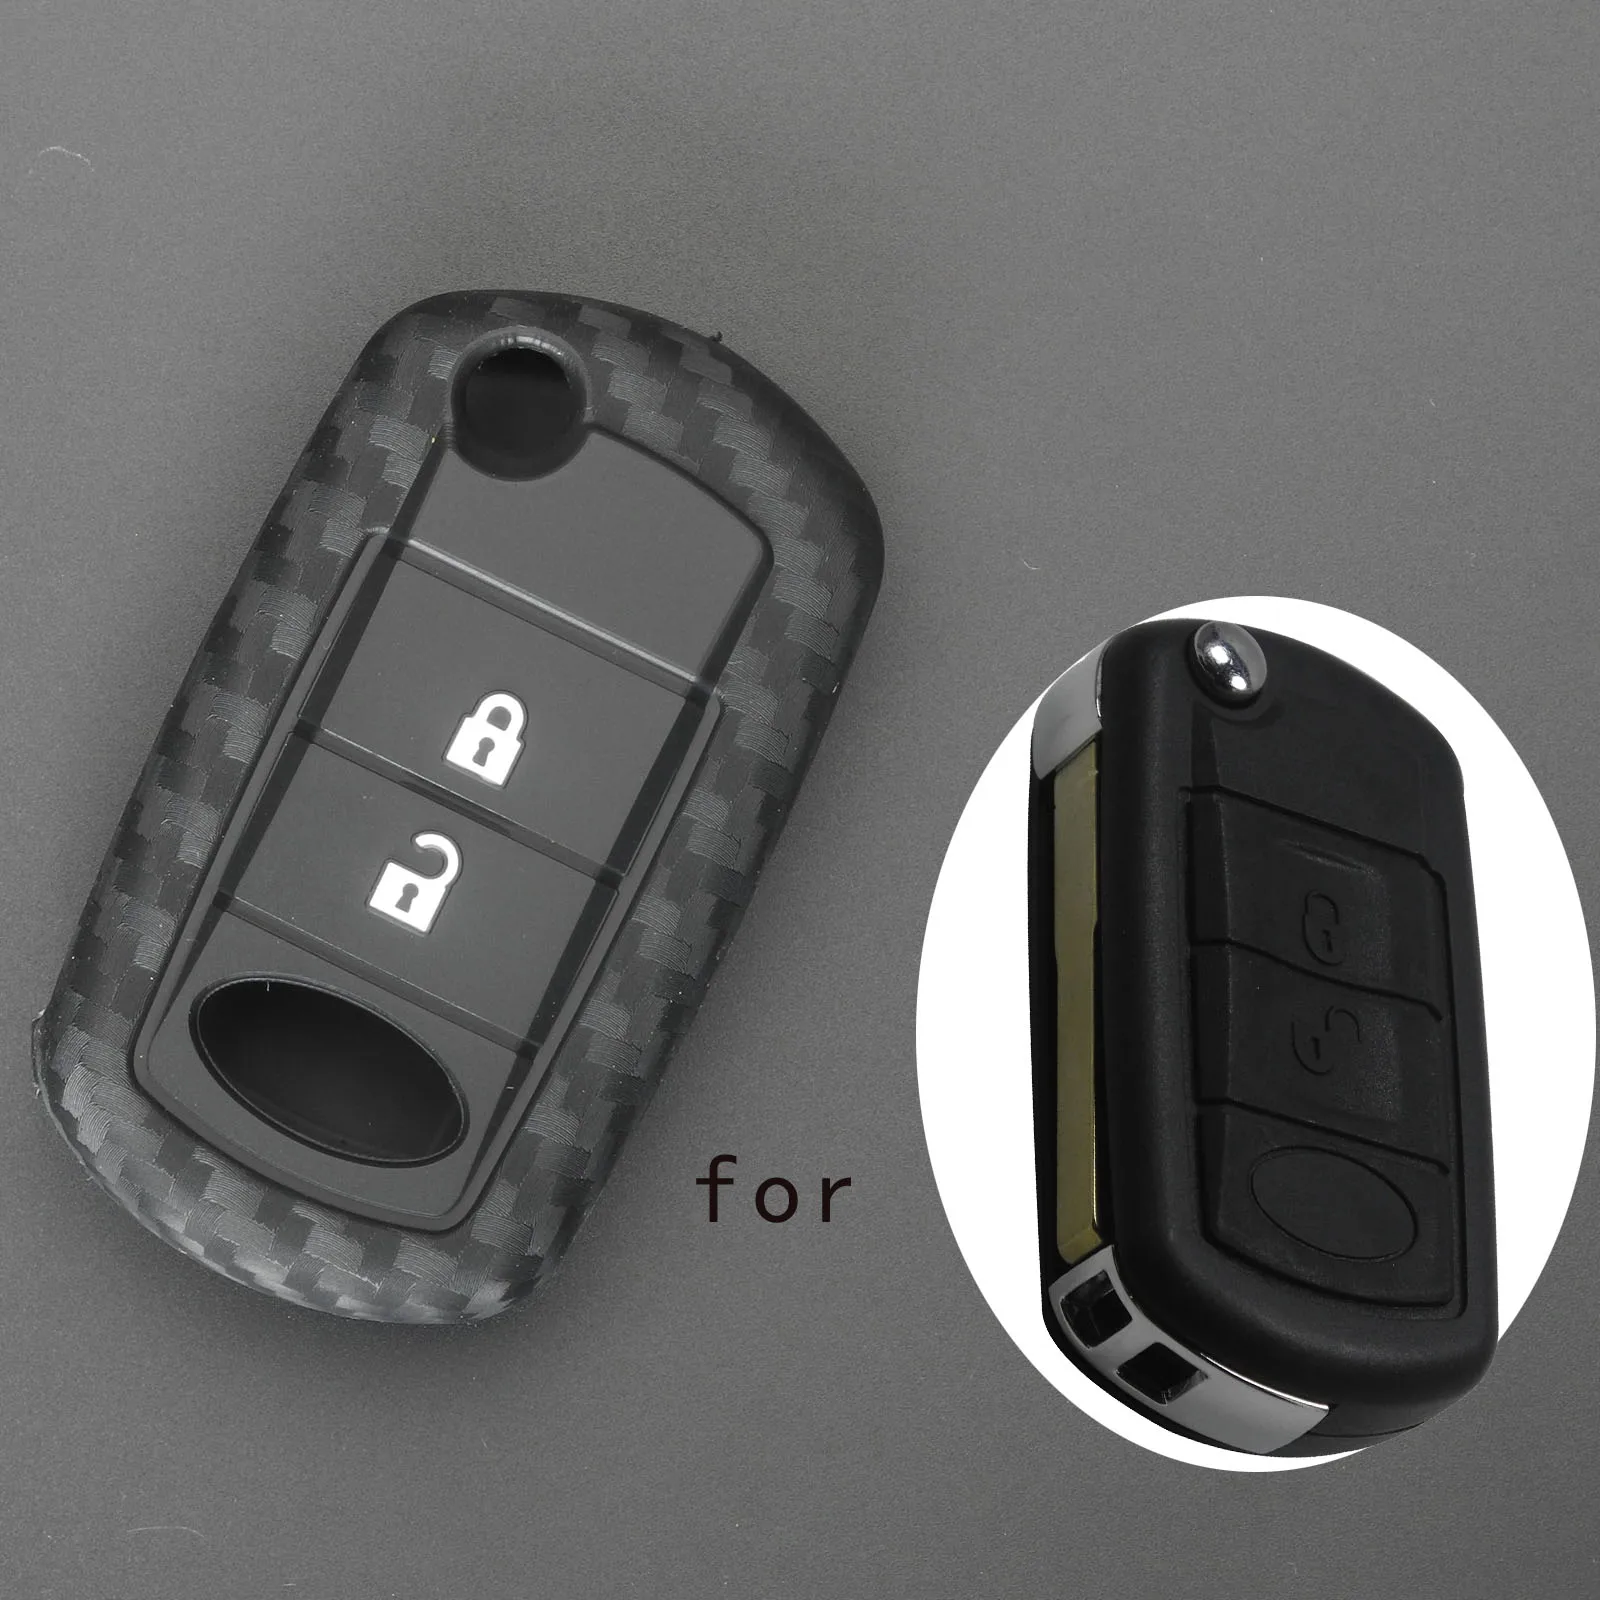 Green Silicone Case Cover For Land Rover Range Discovery LR3 Flip Key 3 Buttons